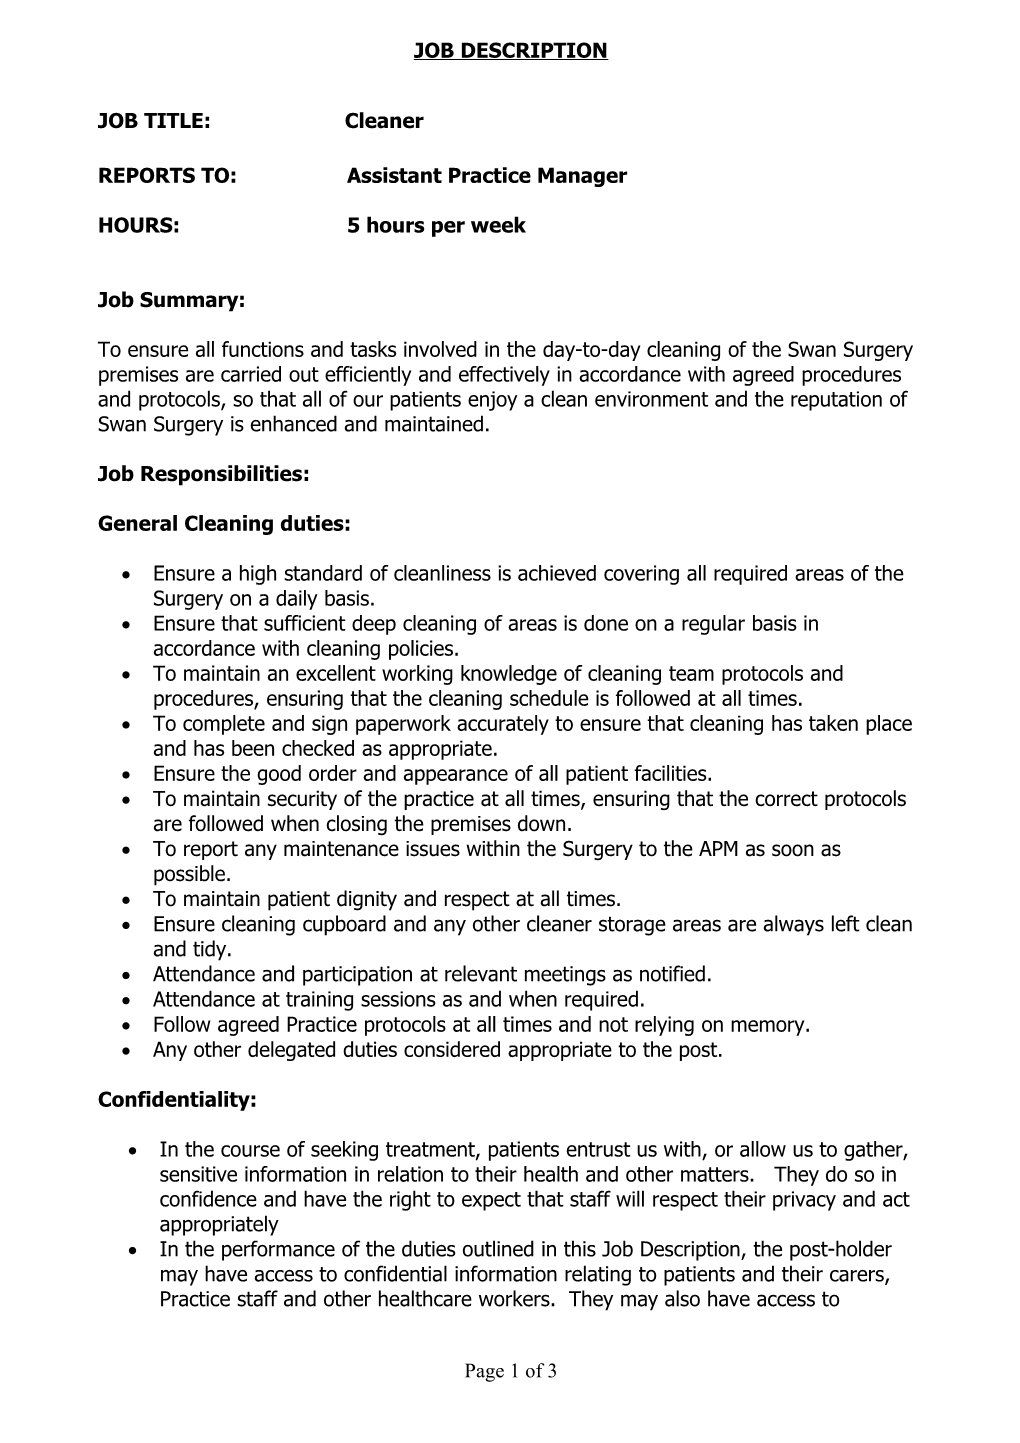 Job Description for the Post of Cleaner